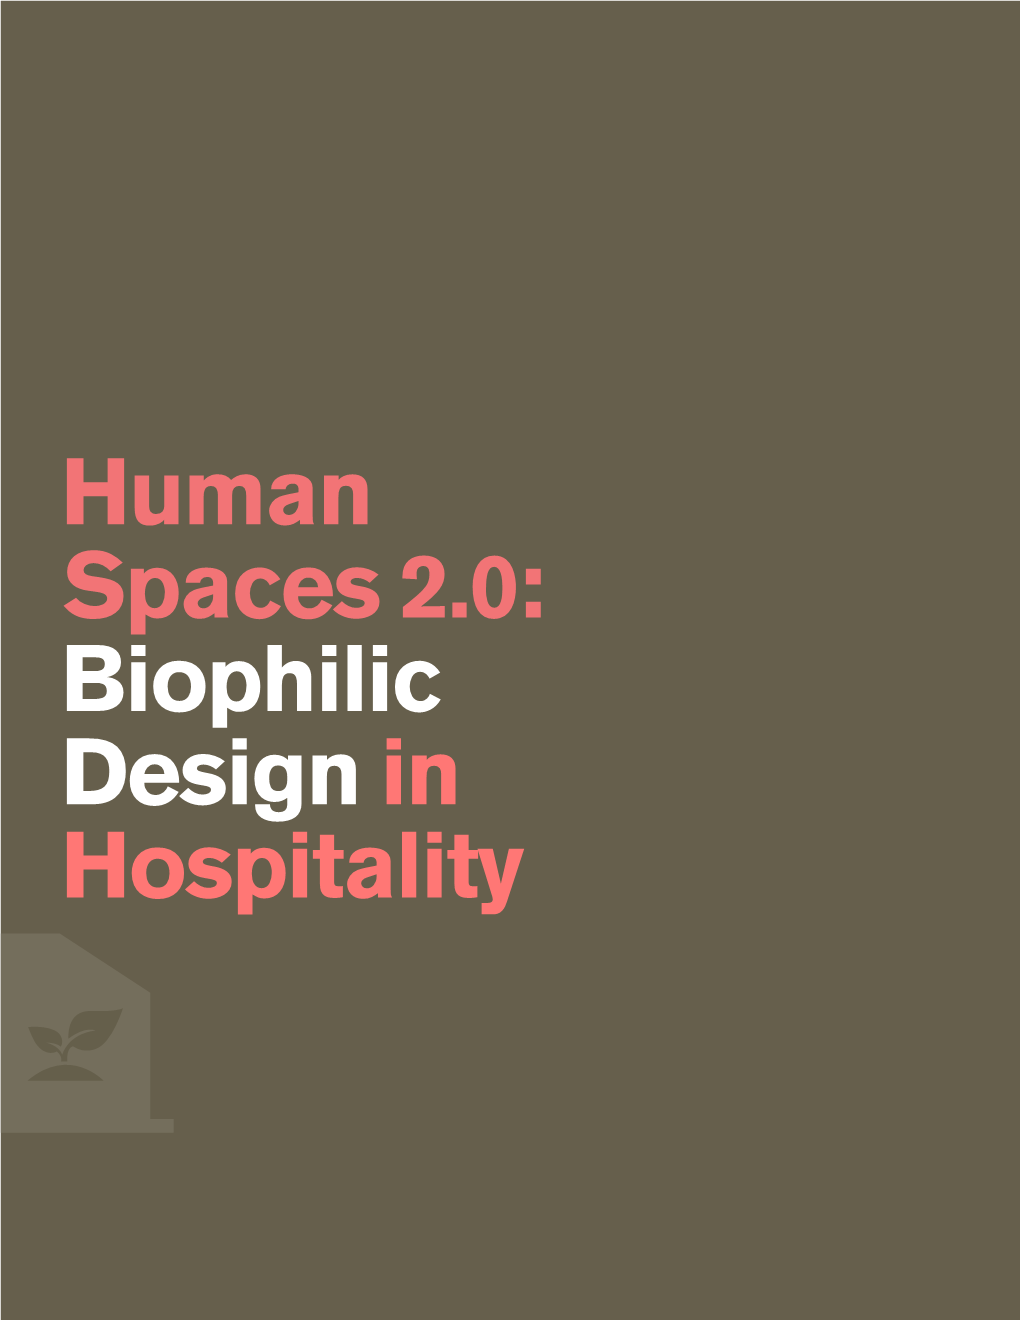 Human Spaces 2.0: Biophilic Design in Hospitality Report Guide